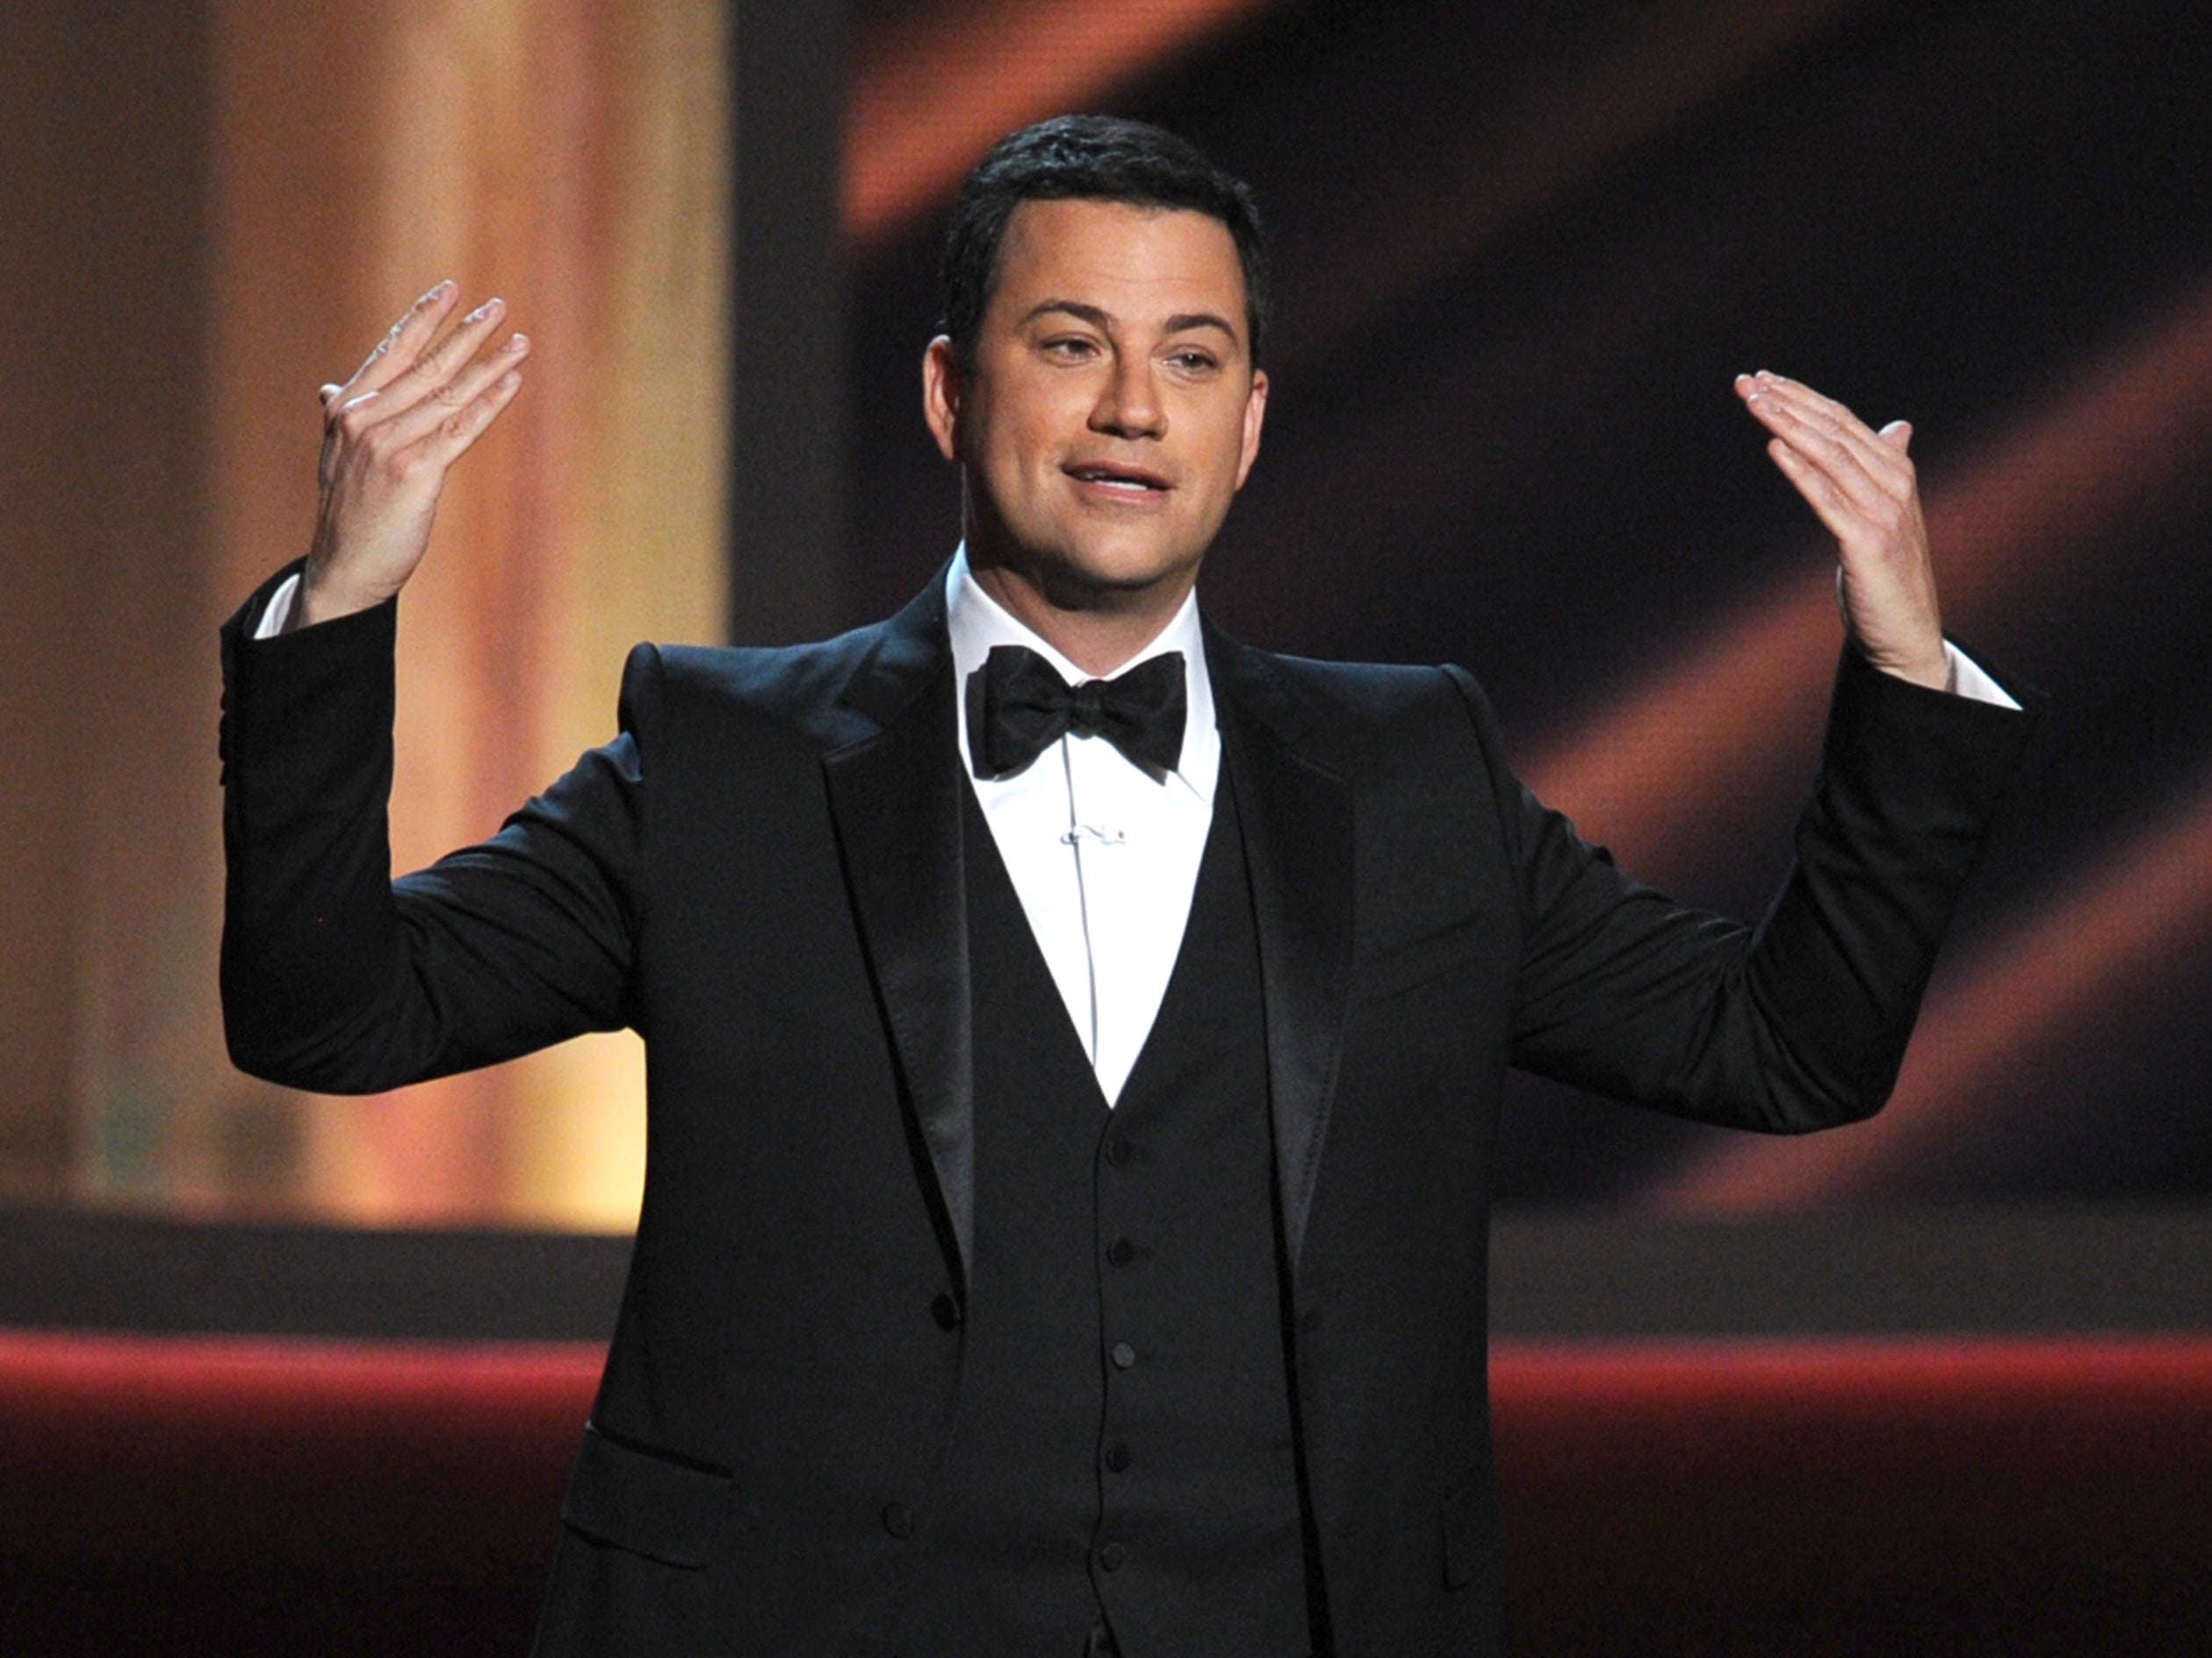 Jimmy Kimmel is hosting this year's virtual Emmys ceremony